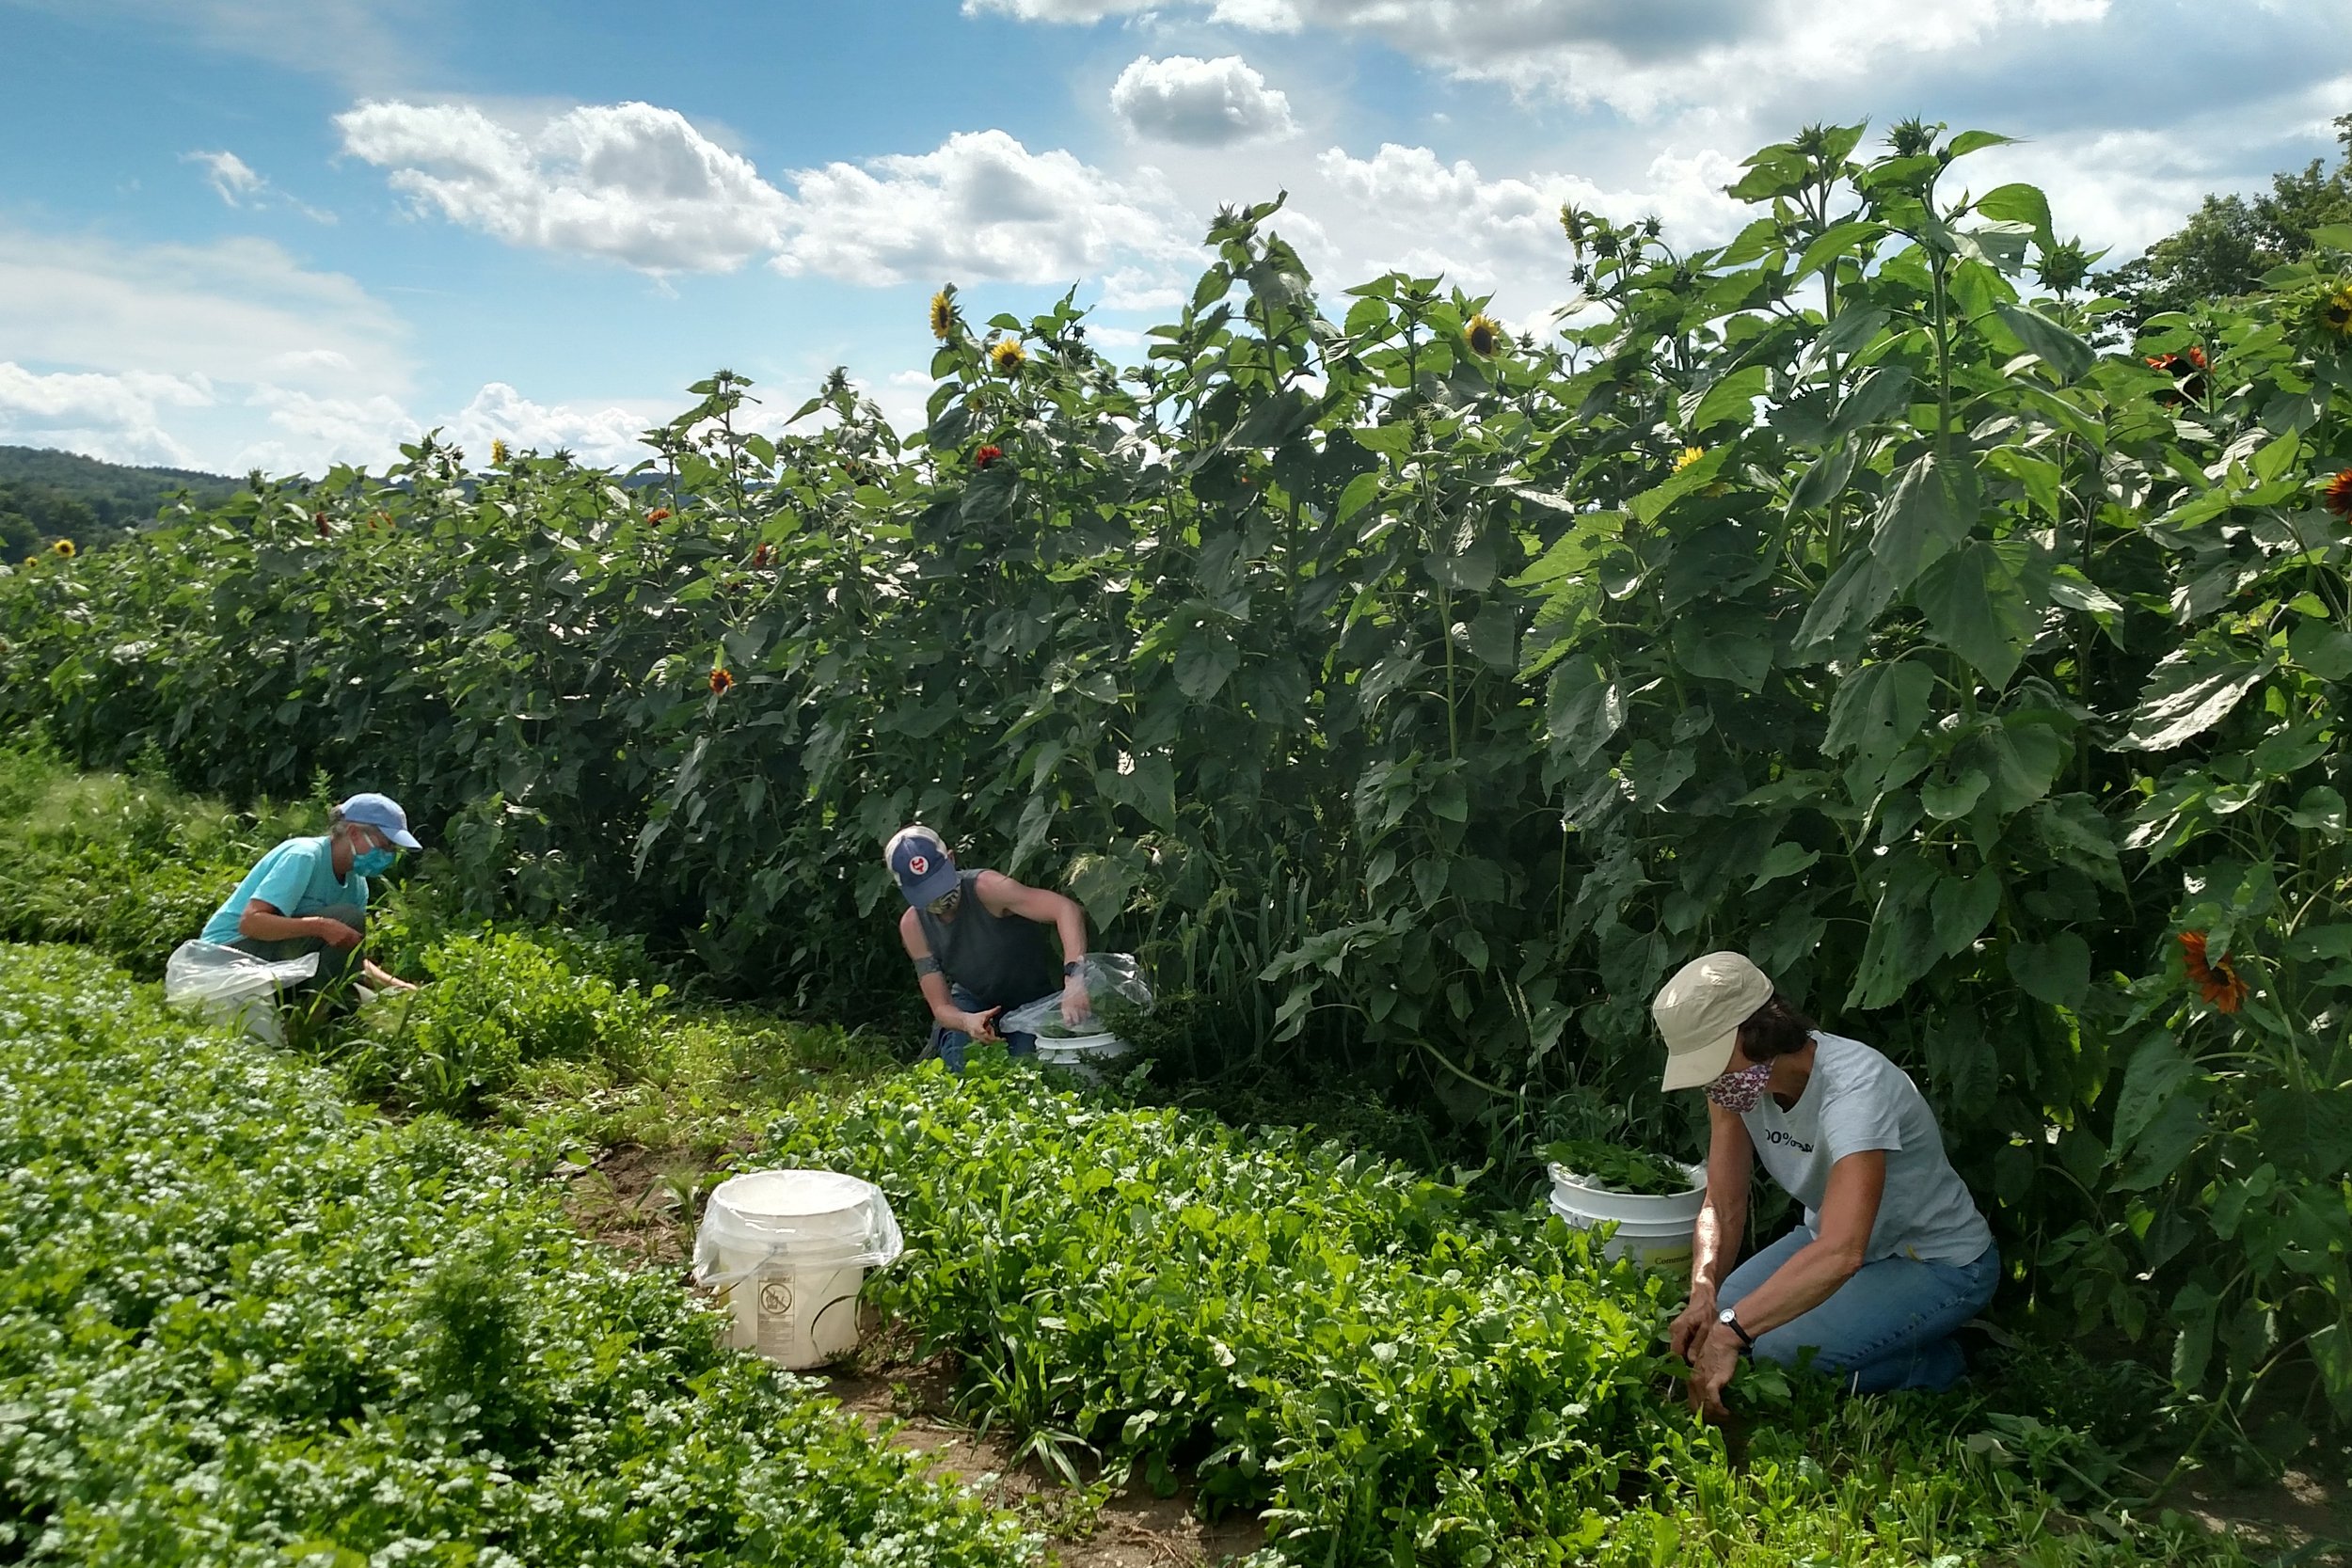 Gleaning while distancing and masked in the summer heat!